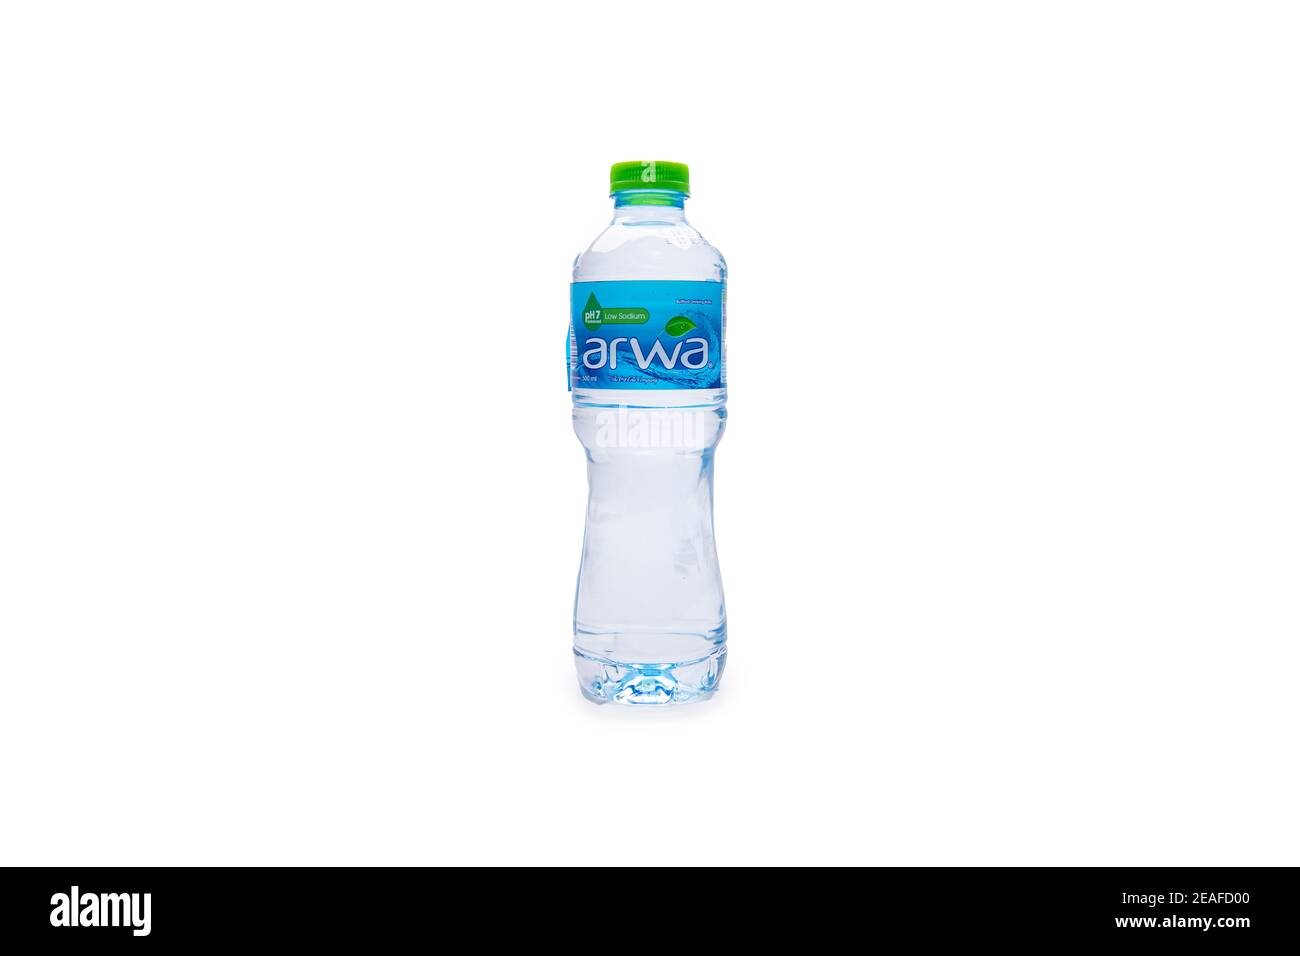 https://c8.alamy.com/comp/2EAFD00/arwa-drinking-water-bottle-on-isolated-background-2EAFD00.jpg